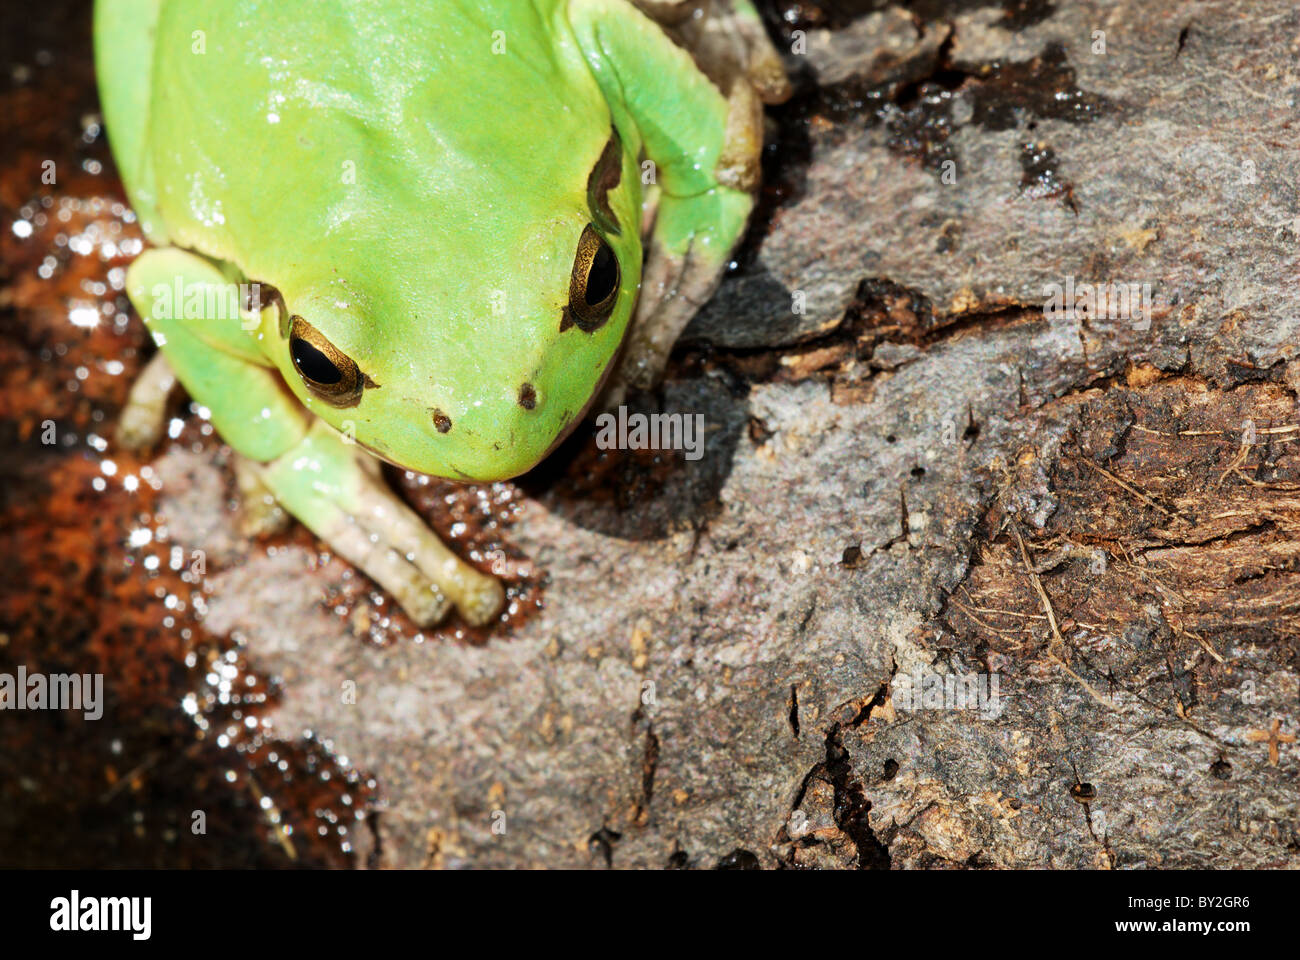 Bright green frog on wood background (selective focus on frog head) Stock Photo